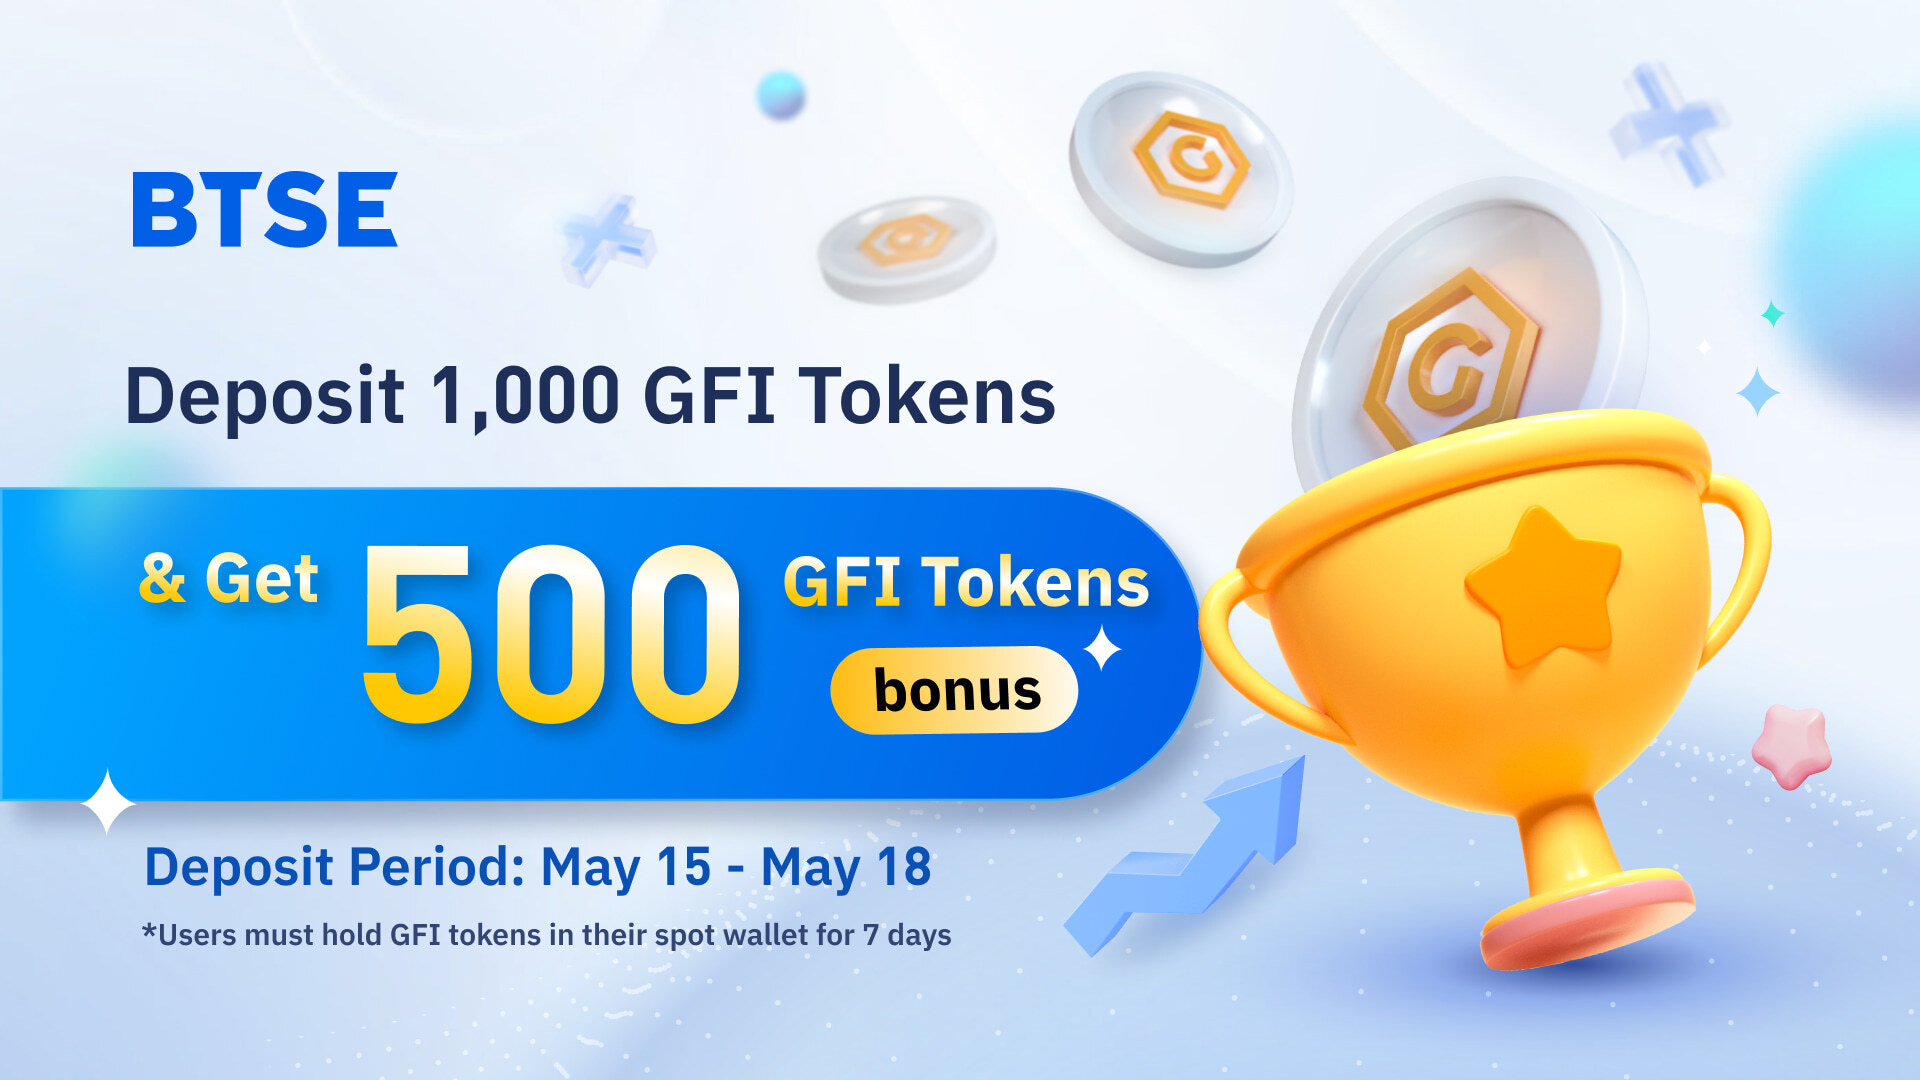 BTSE's Grand GFI Giveaway: Deposit to Win 500 Tokens